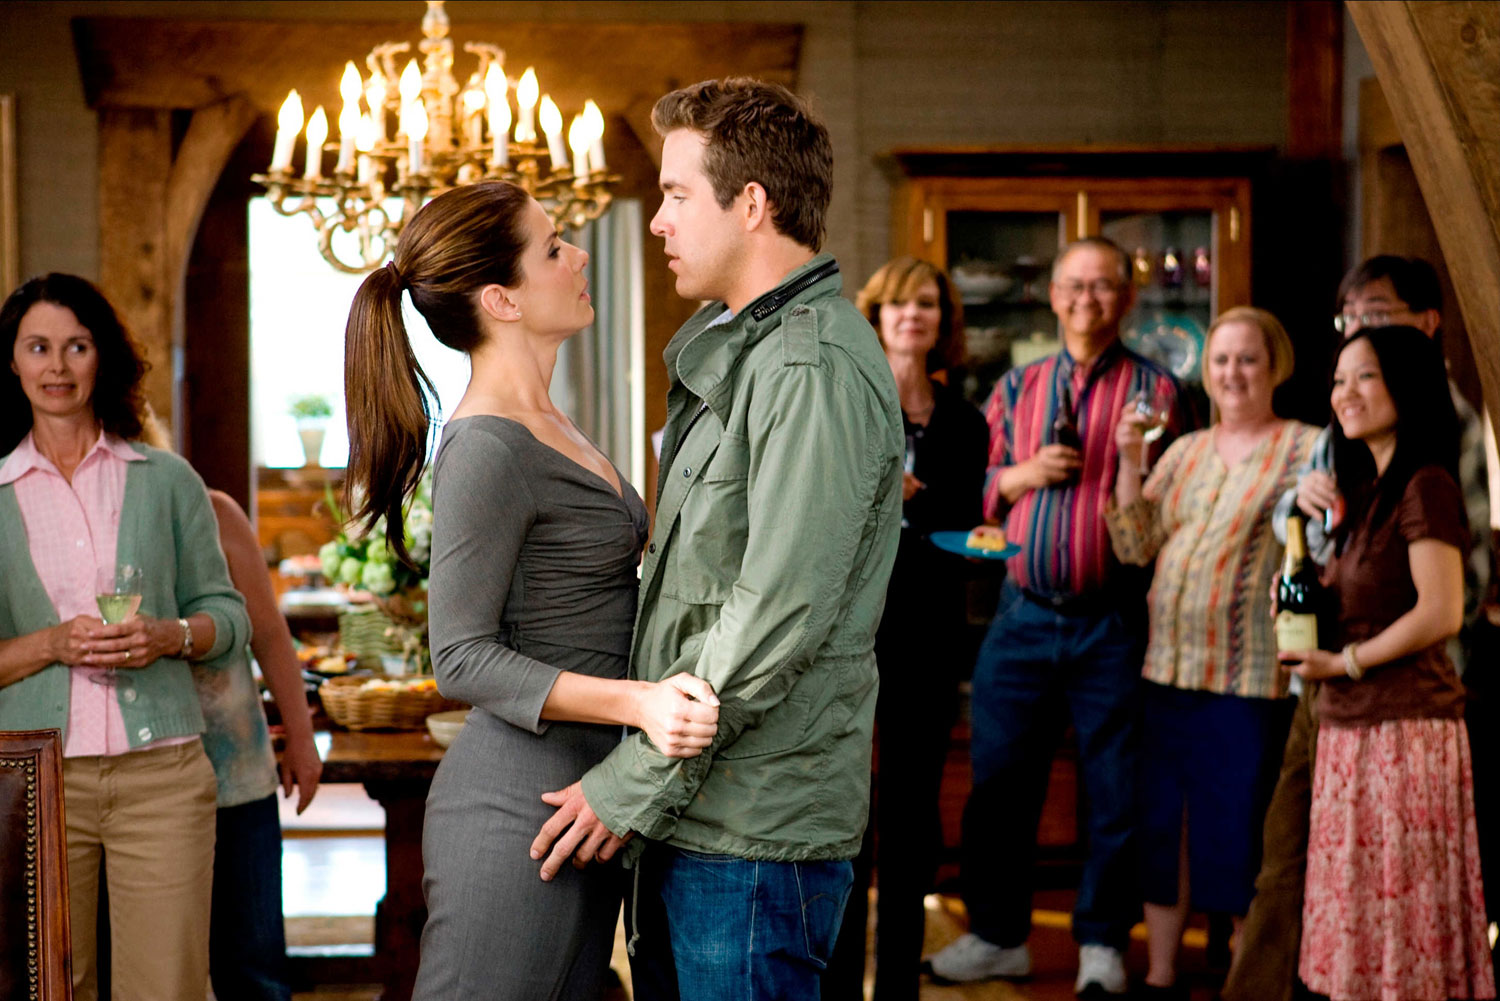 Ryan Reynolds and Sandra Bullock won’t be coming back for The Proposal 2, which is shocking since The Proposal grossed $315 million against a $40 million budget. Disney passed on the opportunity for a sequel because they simply weren’t interested. According to reports, they want to focus on big-budget blockbuster movies (like anything Marvel) or films […]